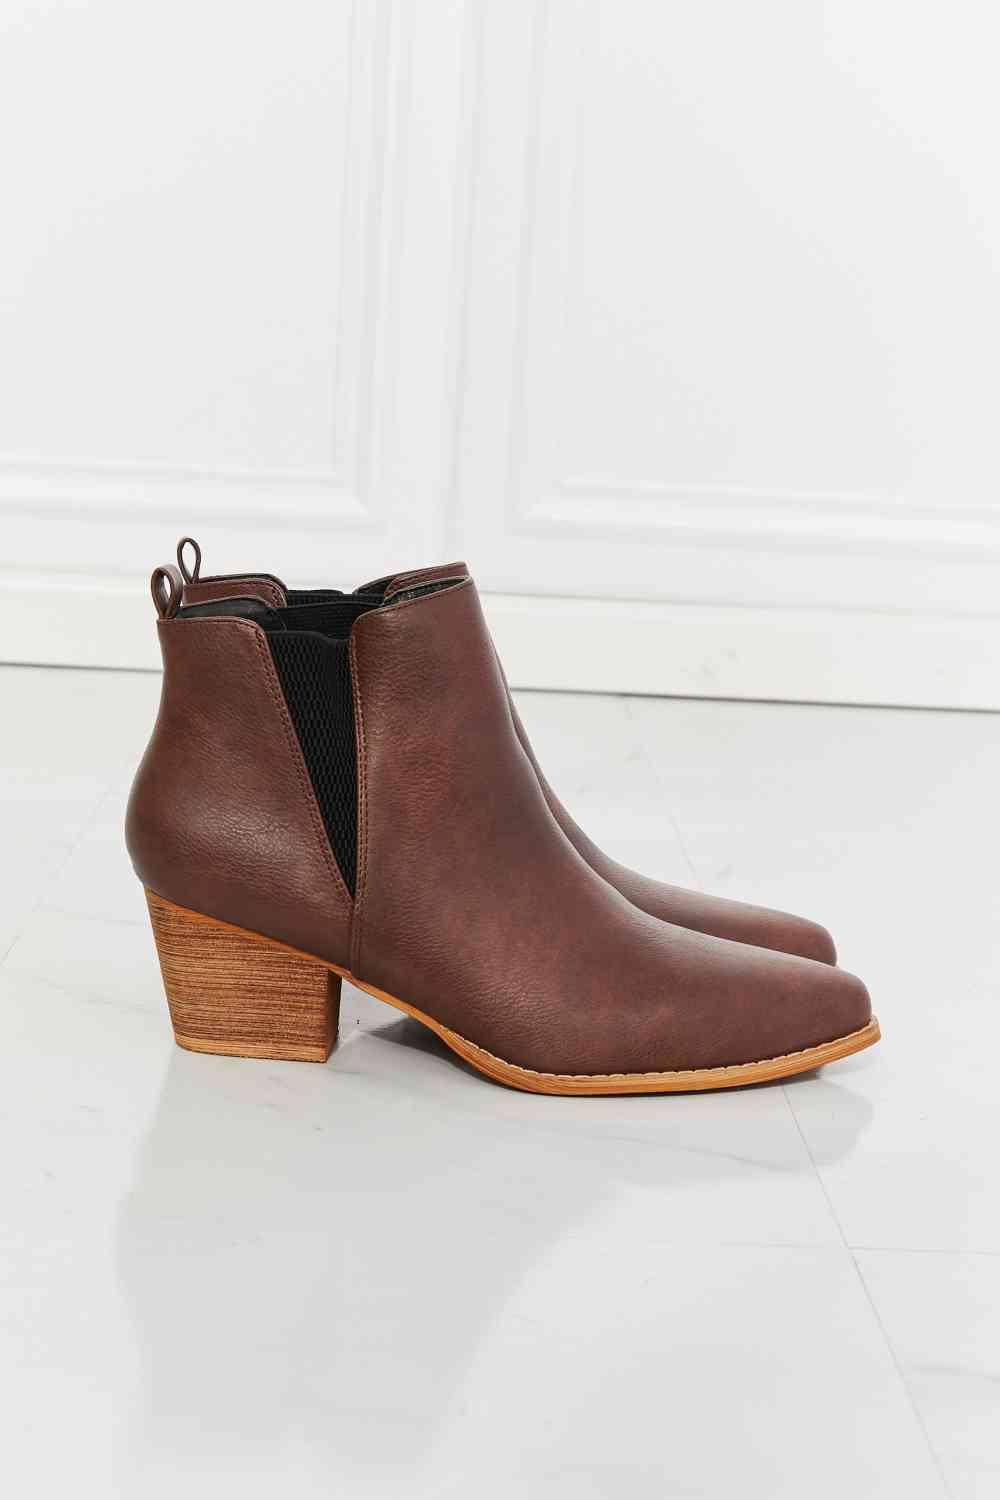 MMShoes Back At It Point Toe Bootie in Chocolate - Happily Ever Atchison Shop Co.